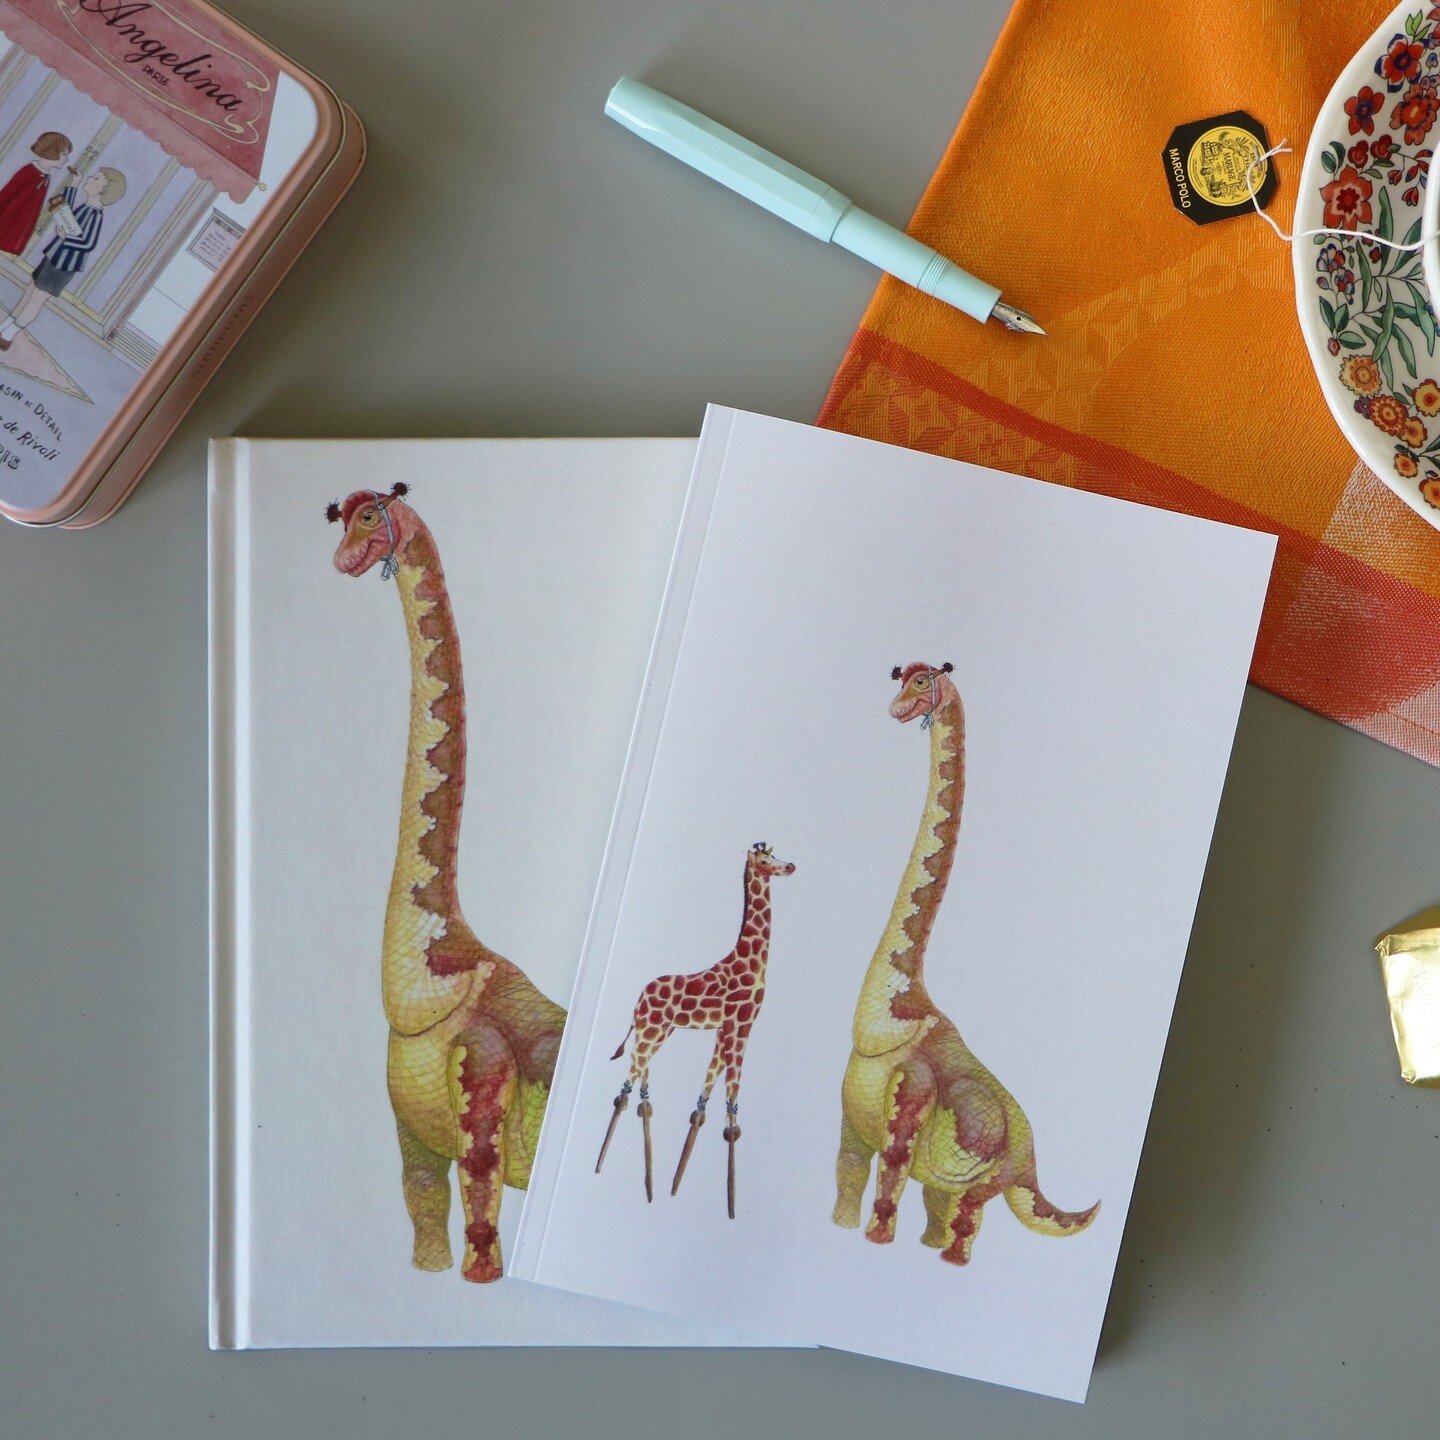 So one of my New Year's resolutions is to not only hoard pretty notebooks, but also make some (and yes, hoard them all the same). Here is a little preview of what's coming next 🤓

#dinosaur #dinoart #sauropod #notebooktherapy